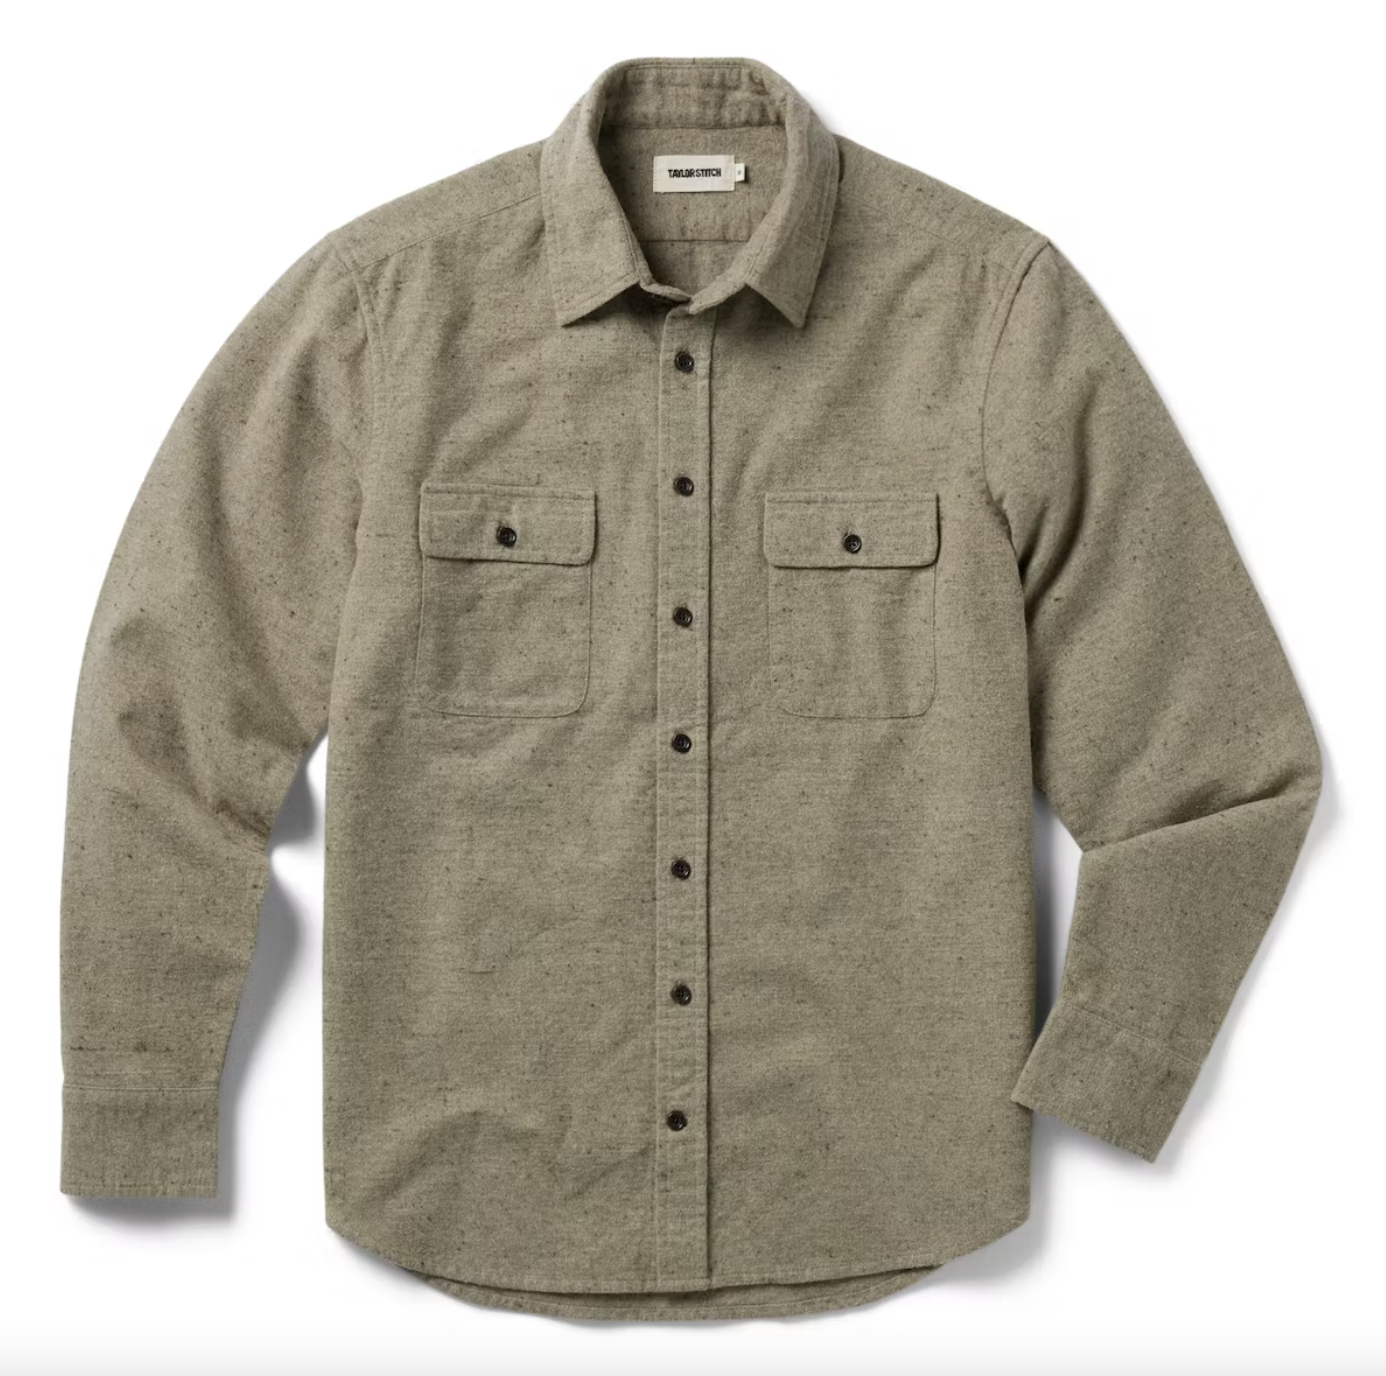 Taylor Stitch Has Men's Shirts and Sweaters For Every Fall Look - BroBible